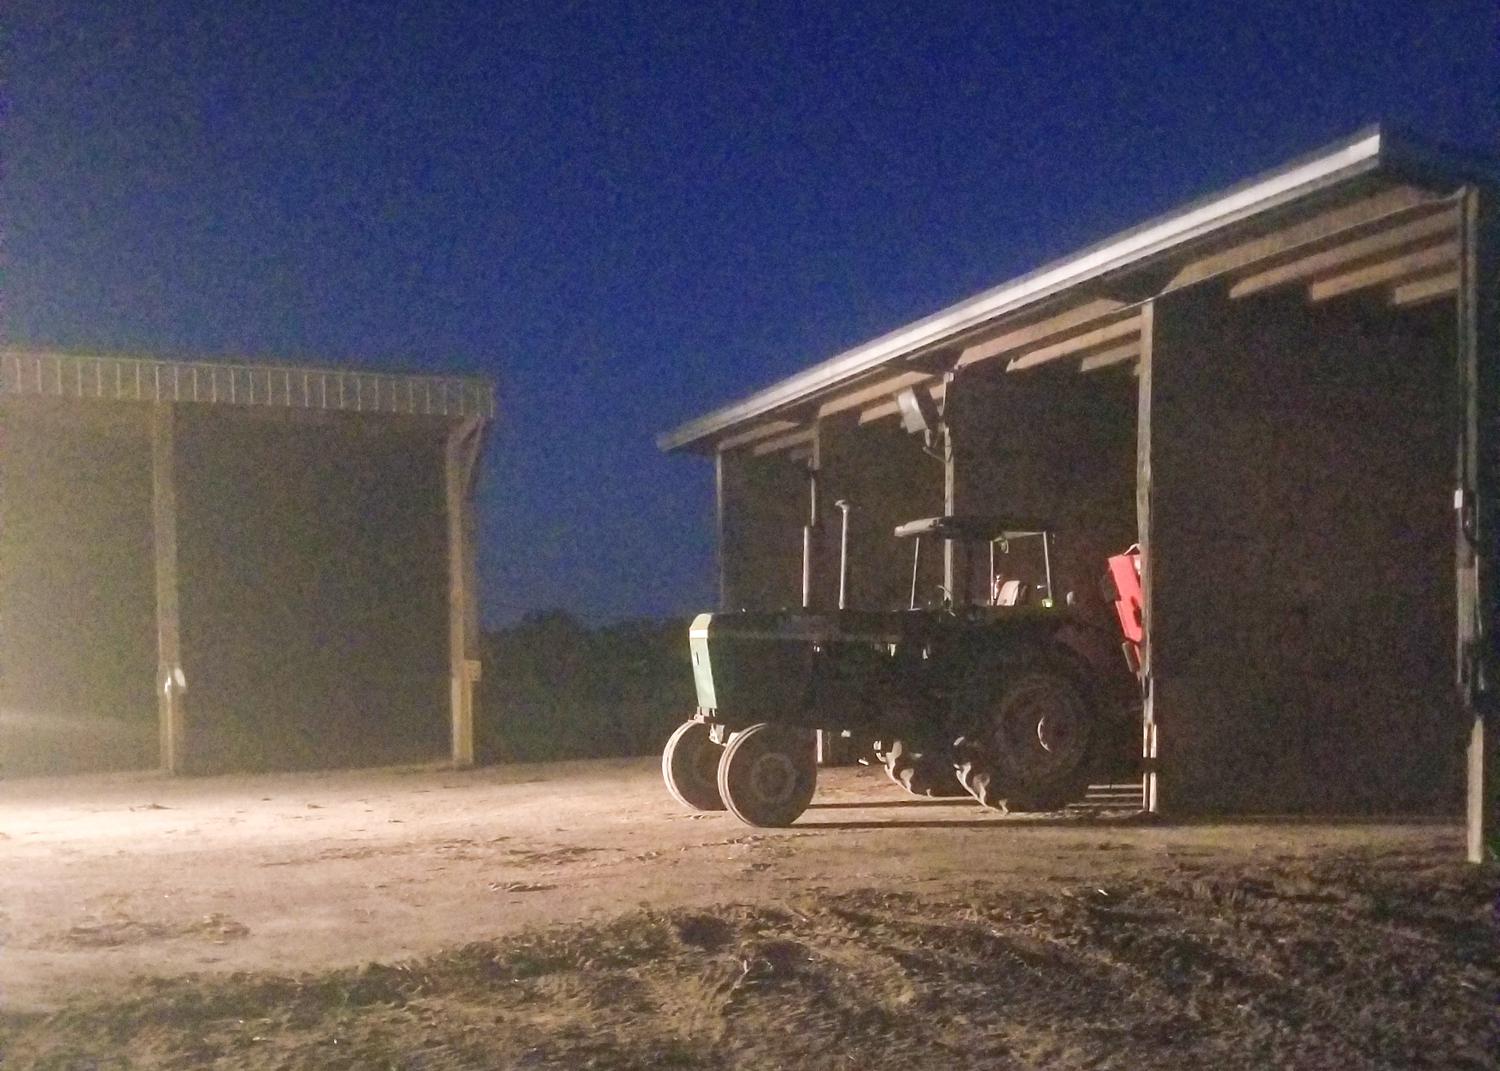 A tractor parked outside of a shed at night.